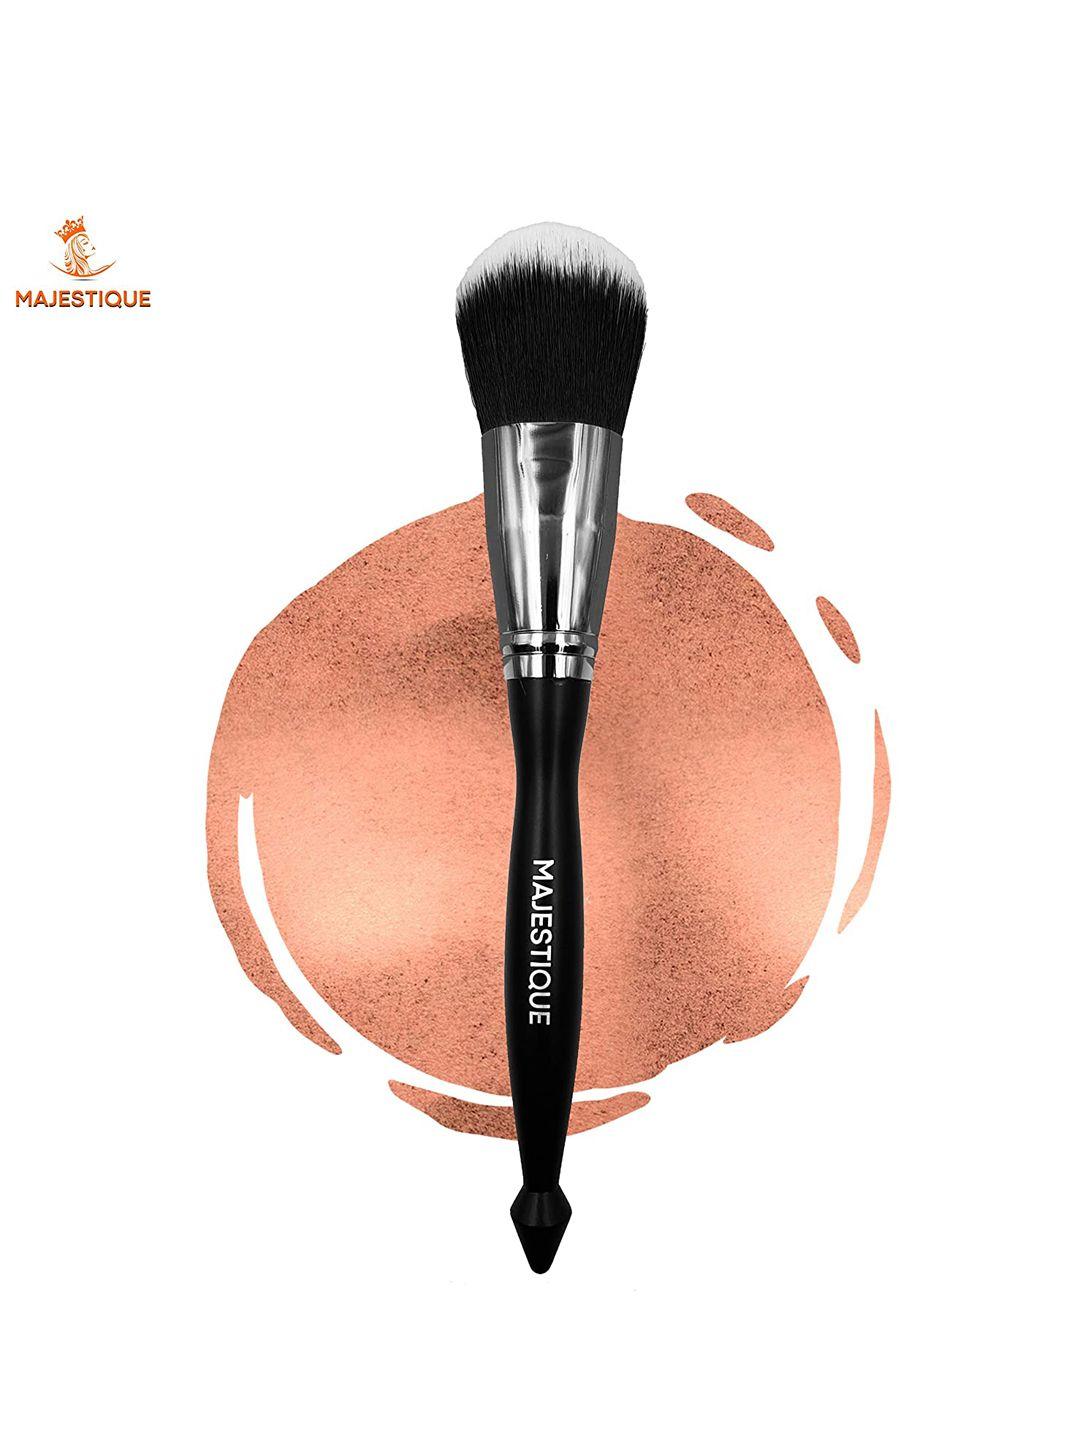 majestique beauty highlighter powder makeup brush with soft bristles